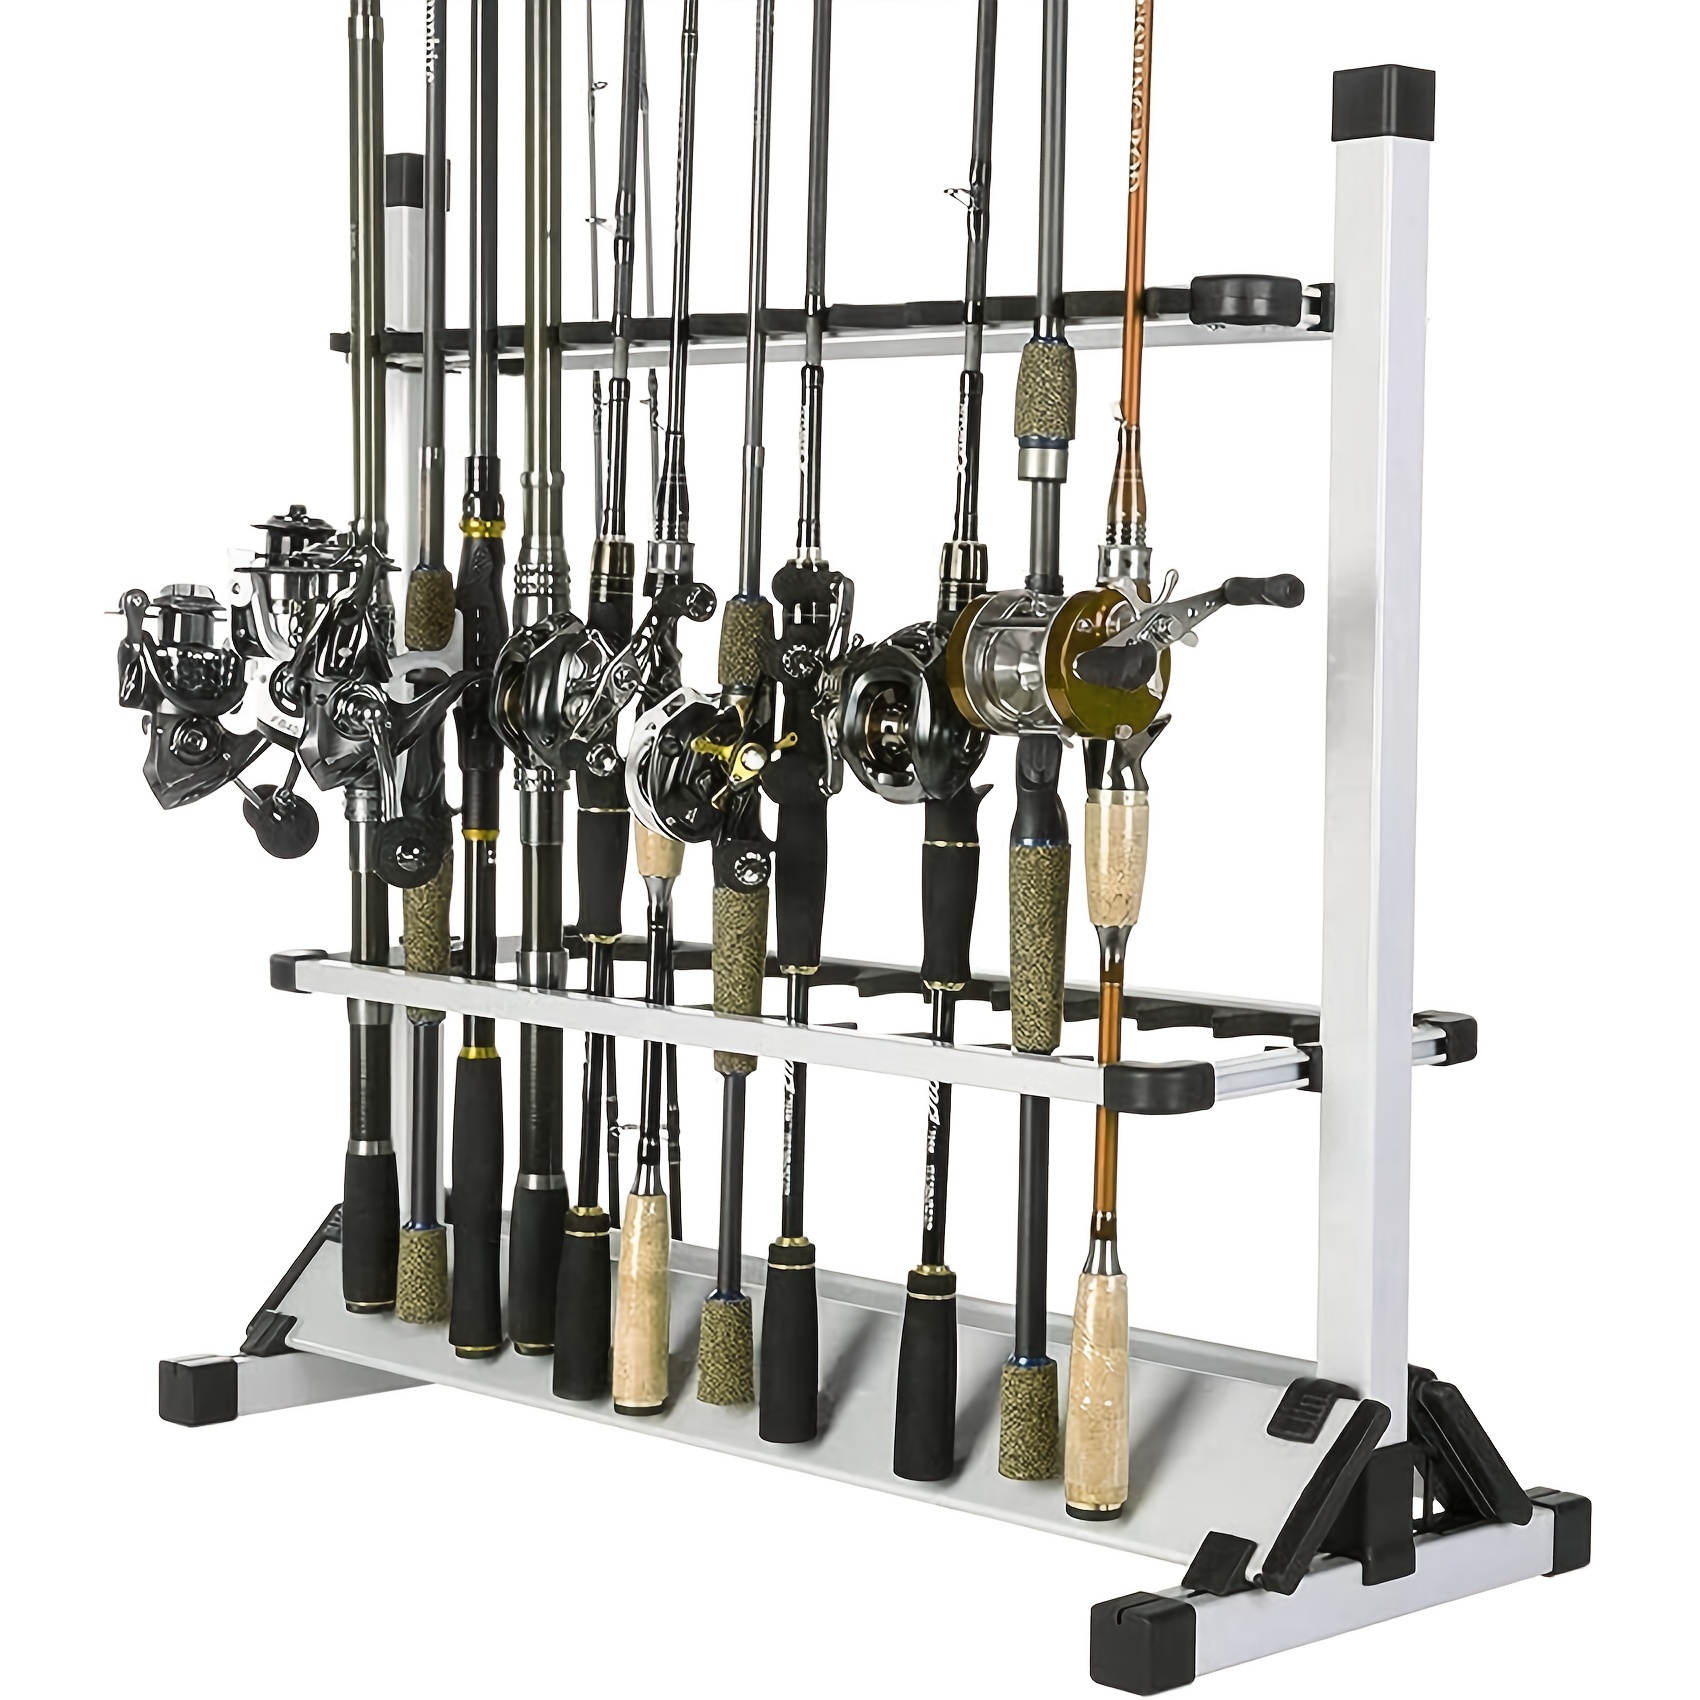 

Tika Sports Aluminum Fishing Rod Rack - Holds 12/24 Rods, Space-saving Design With Padded Frame For Secure Storage, Ideal For Home & Garage Use